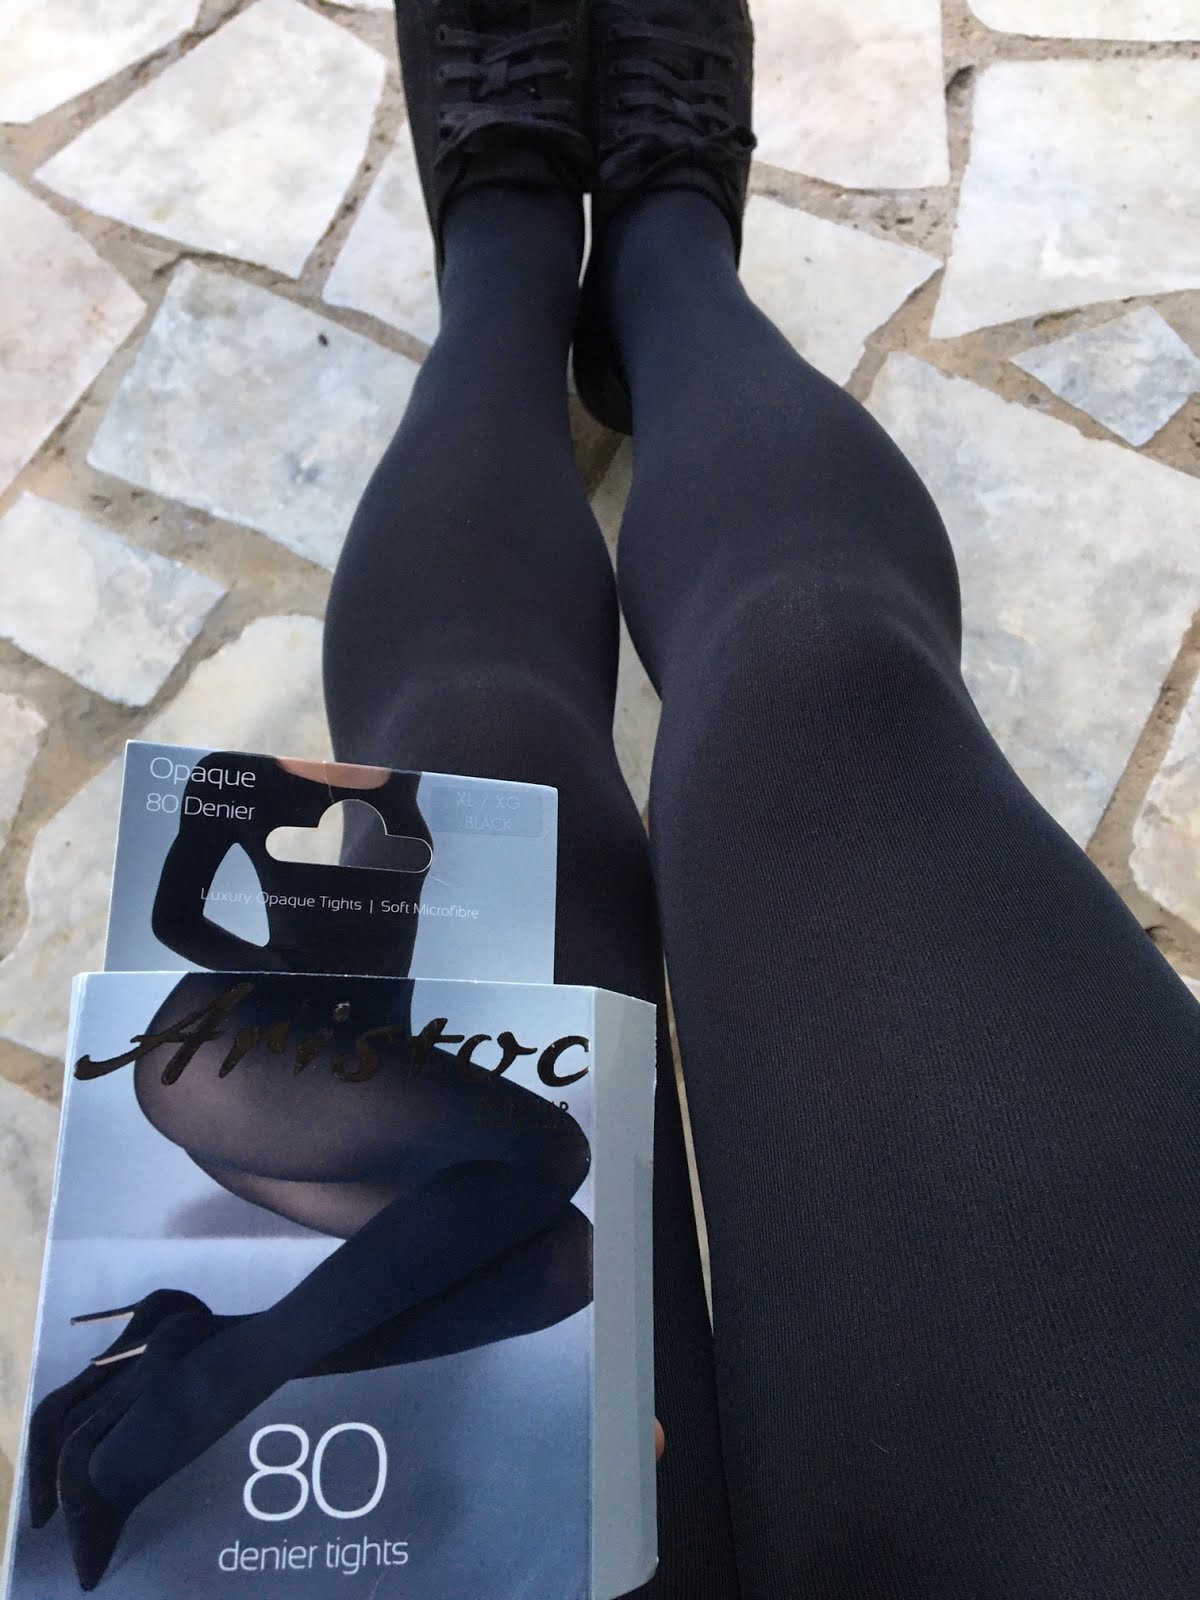 Hosiery For Men: Reviewed: Aristoc 80 Denier Opaque Tights